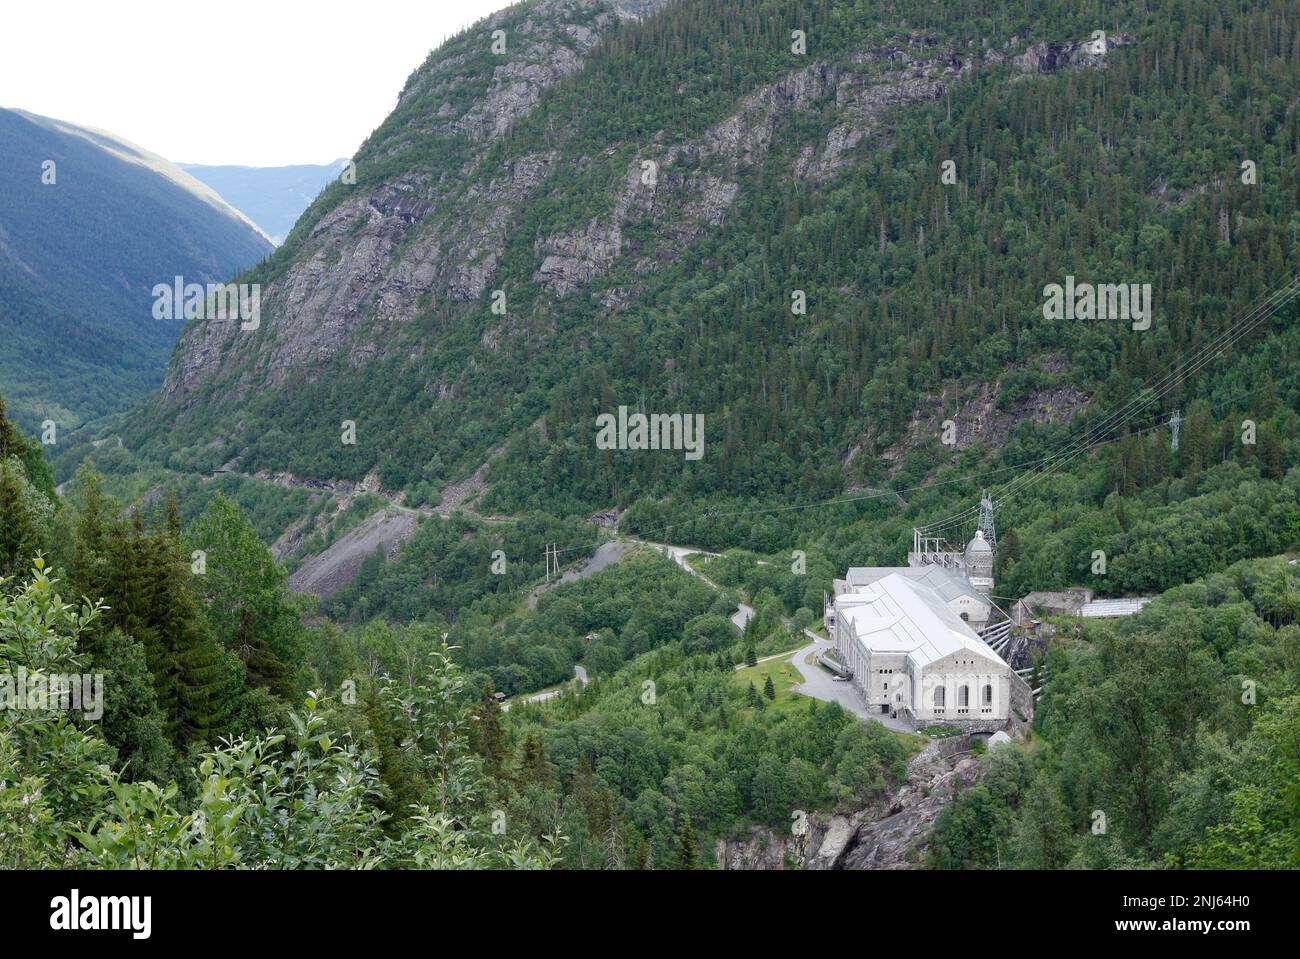 RJUKAN, NORWAY ON JULY 07, 2010. Vemork Hydroelectric Power Plant. Resistance fighters sabotage 1943, Gunnerside. Editorial use. Stock Photo